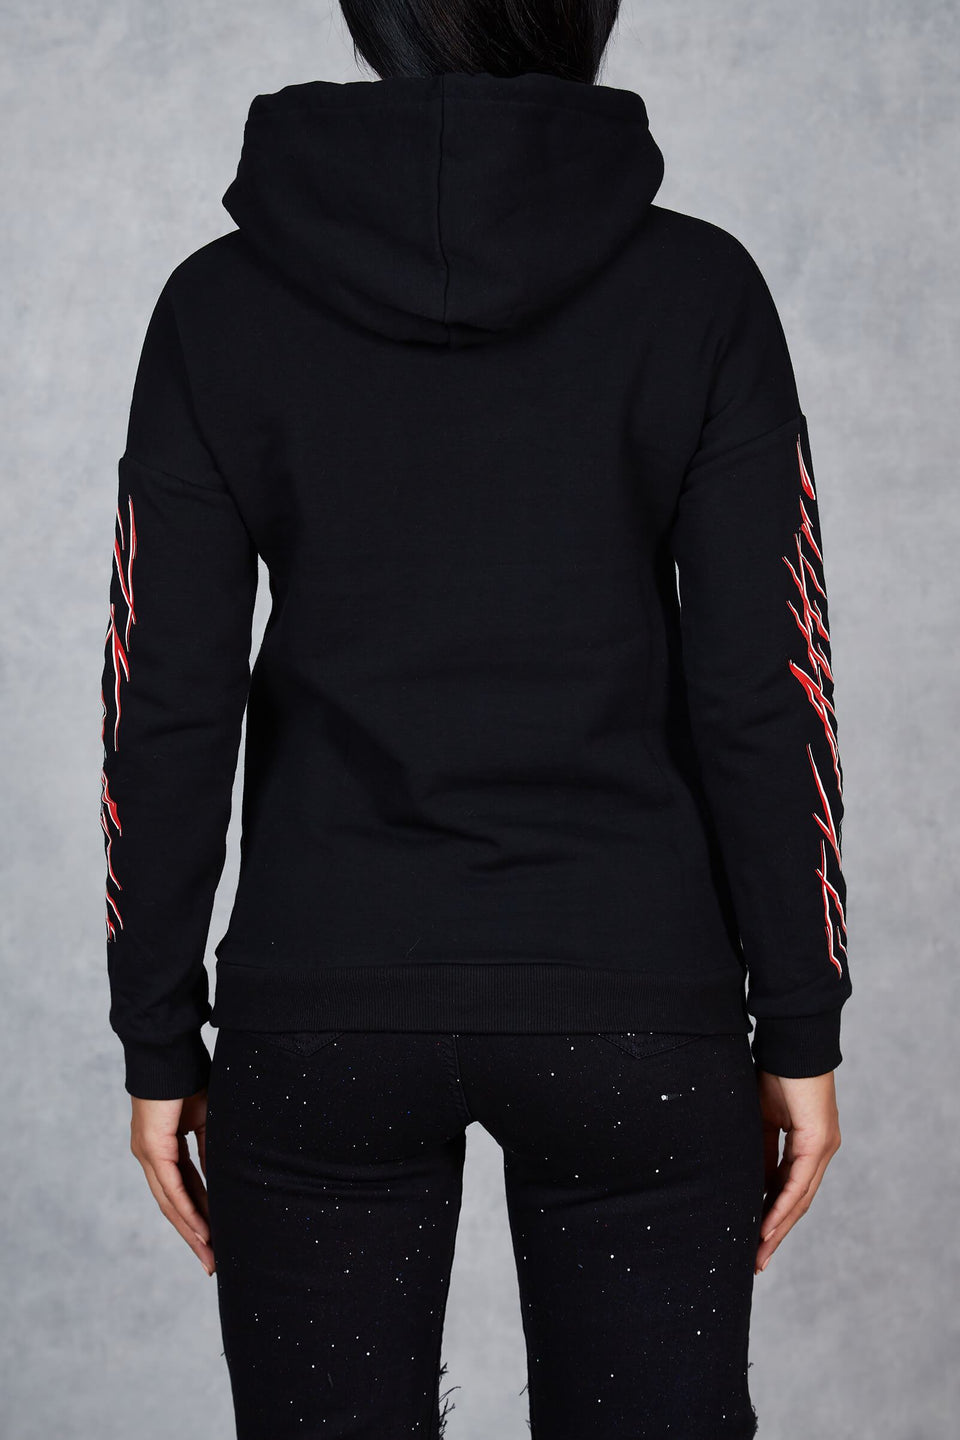 Oversized Trap Hoodie - Black/Red